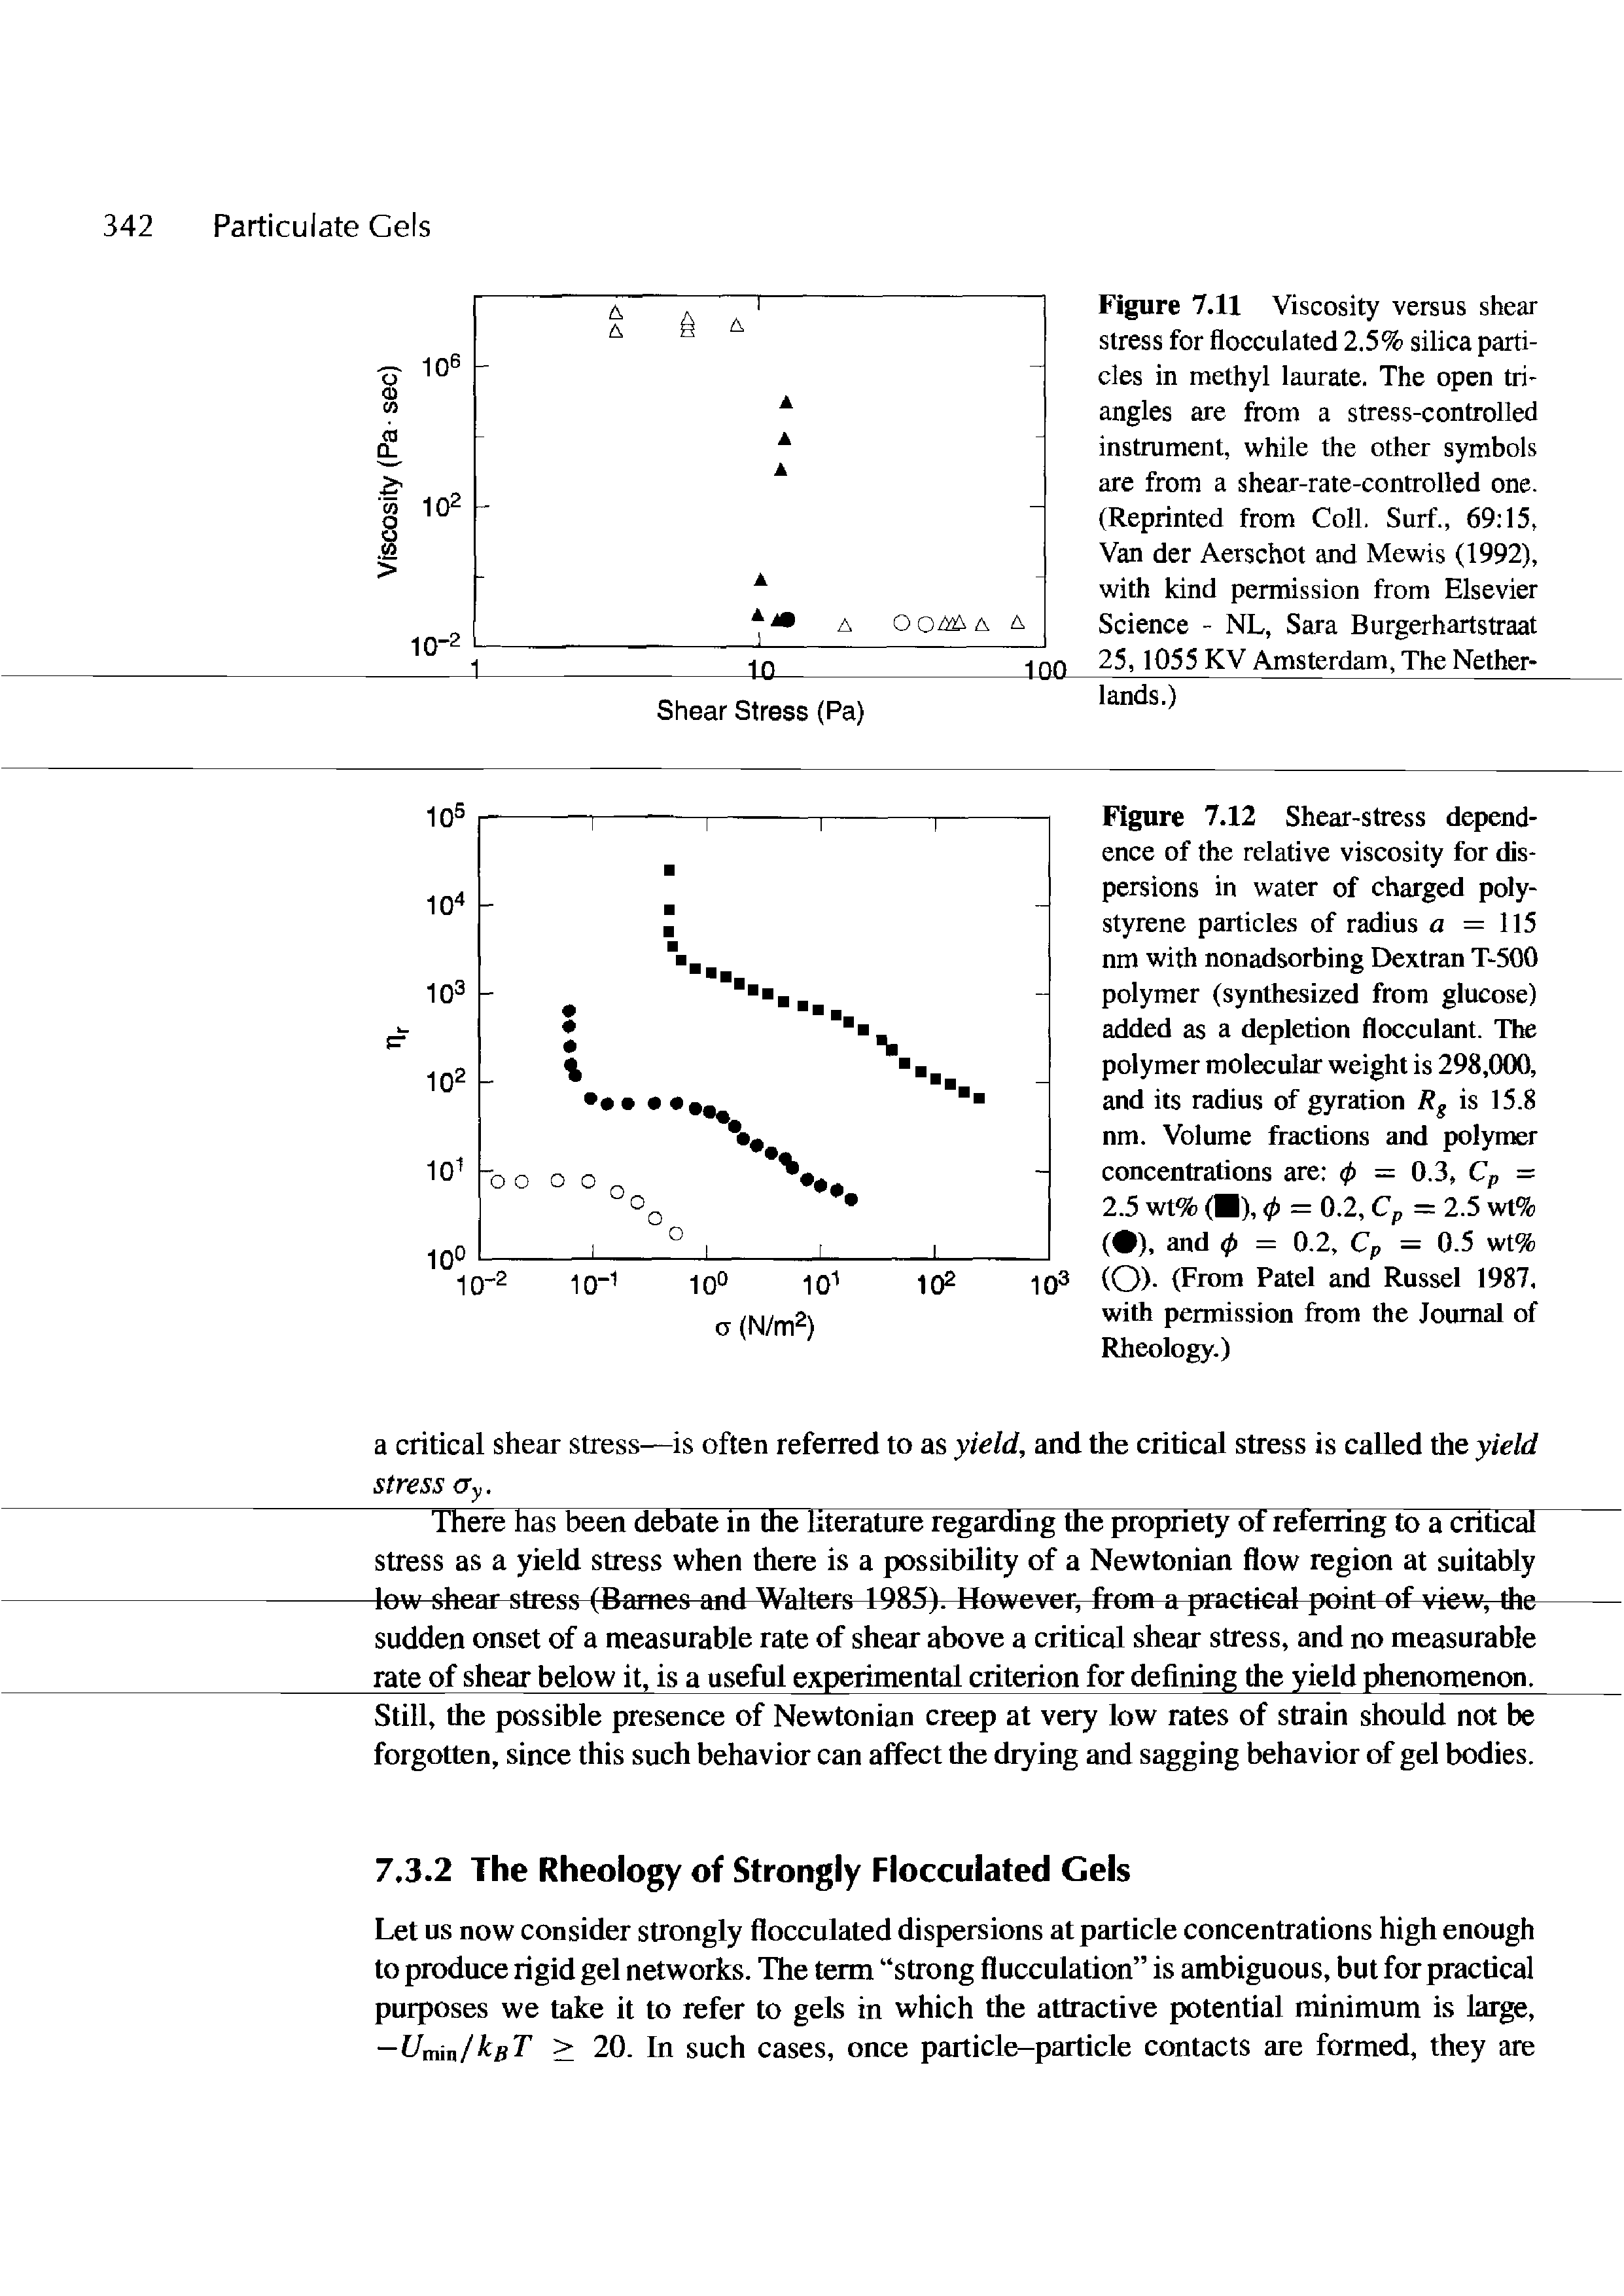 Figure 7.12 Shear-stress dependence of the relative viscosity for dispersions in water of charged polystyrene particles of radius a = 115 nm with nonadsorbing Dextran T-500 polymer (synthesized from glucose) added as a depletion flocculant. The polymer molecular weight is 298,(HX), and its radius of gyration Rg is 15.8 nm. Volume fractions and polymer concentrations are <p = 0.3, Cp = 2.5 wt% ( ), 0 = 0.2, Cp = 2.5 wt% ( ), and (p = 0.2, Cp — 0.5 wt% (O)- (From Patel and Russel 1987, with permission from the Journal of Rheology.)...